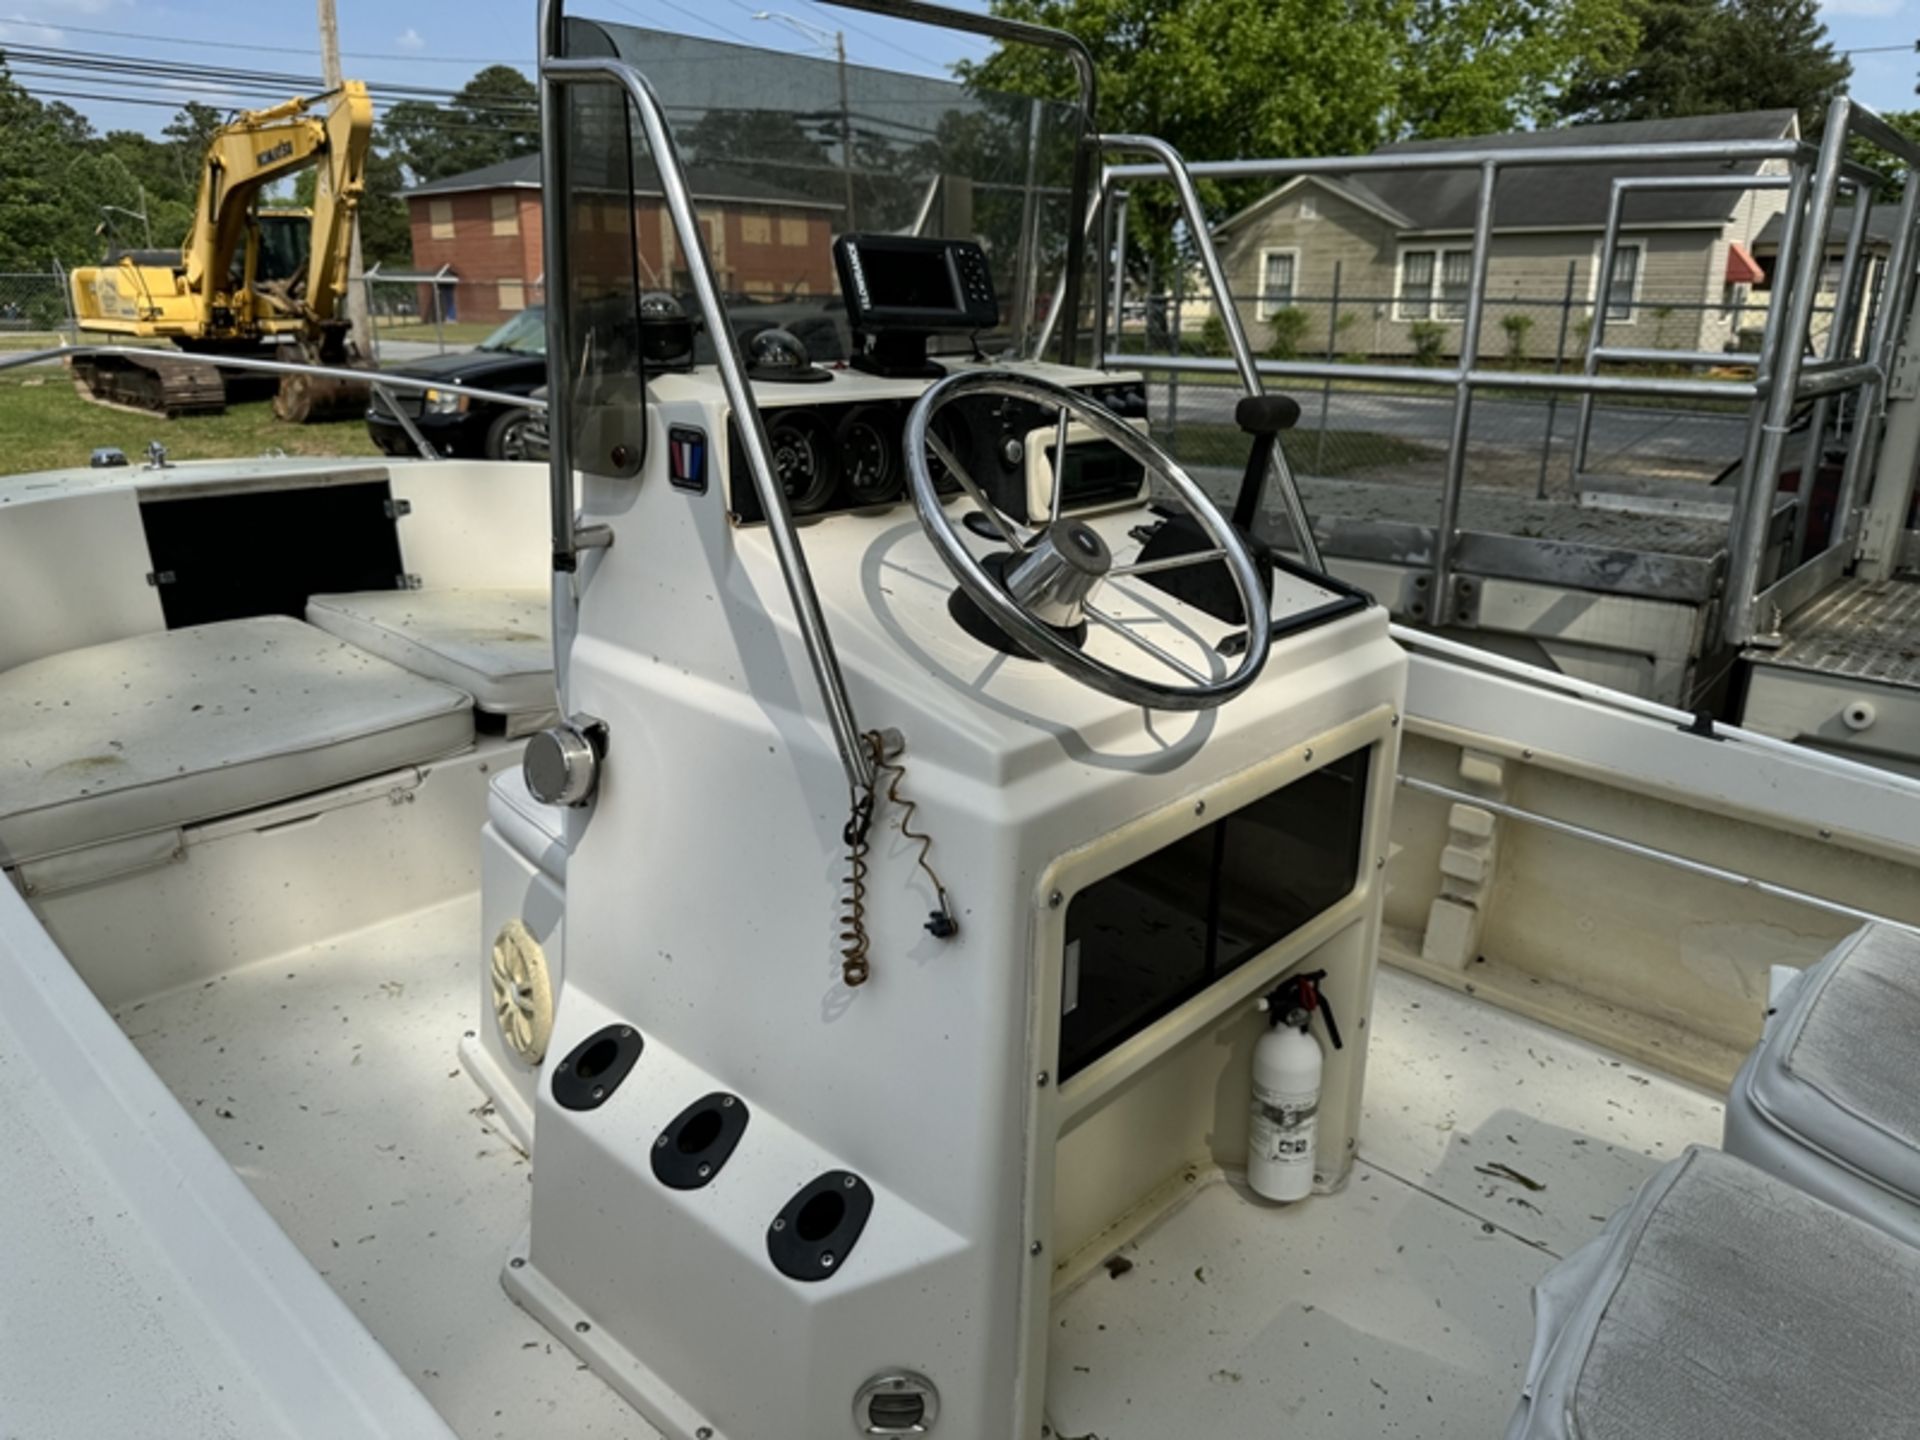 1990 WELLCRAFT 18’ center console with Johnson 110 - WELD3721F990 - Image 7 of 8